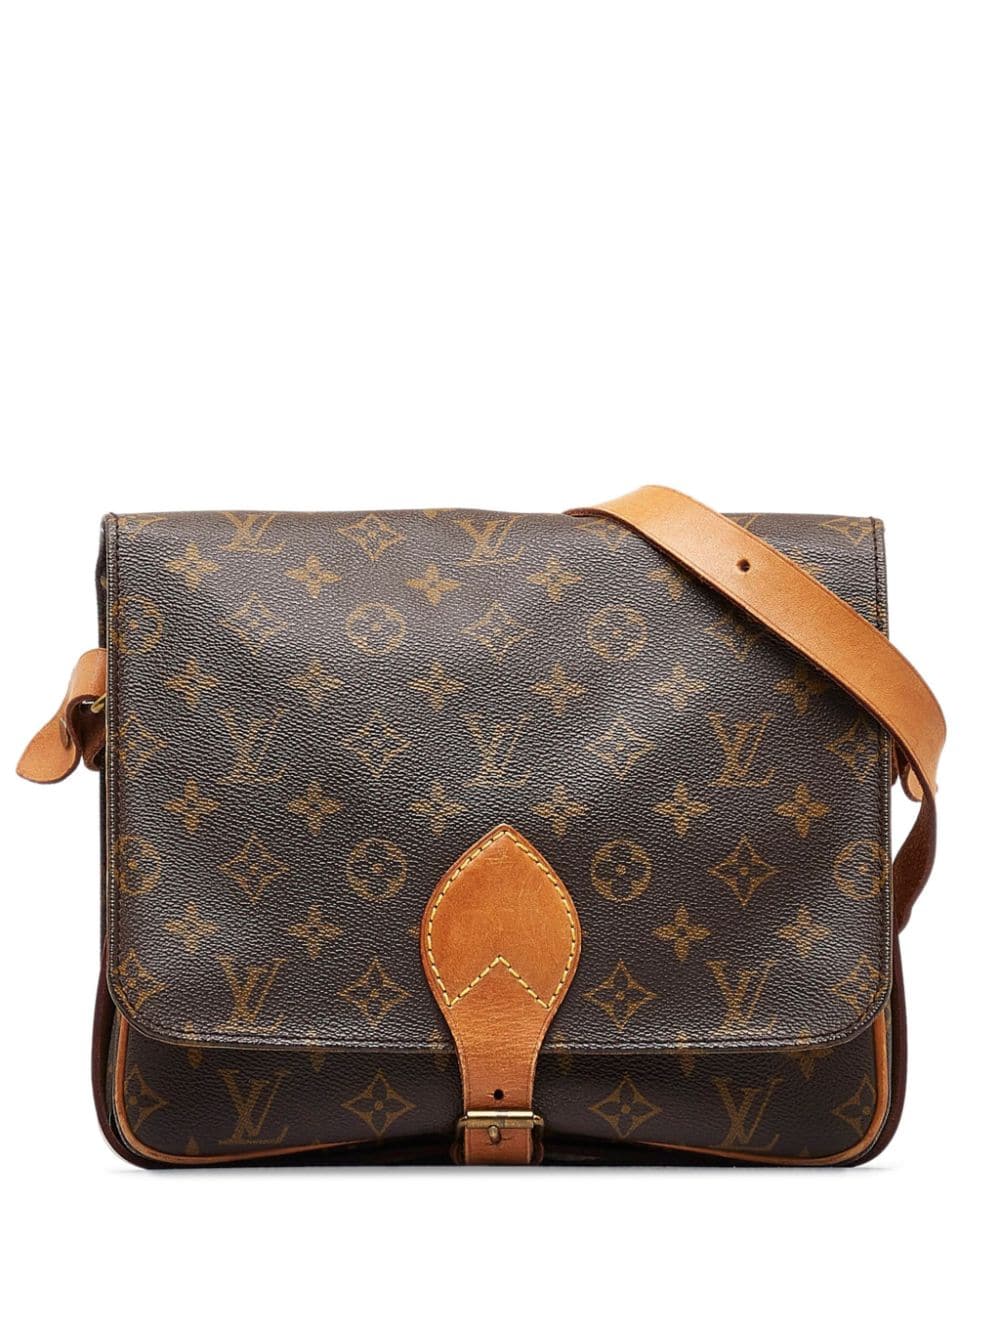 Cartouchiere GM  Used & Preloved Louis Vuitton Messenger Bag